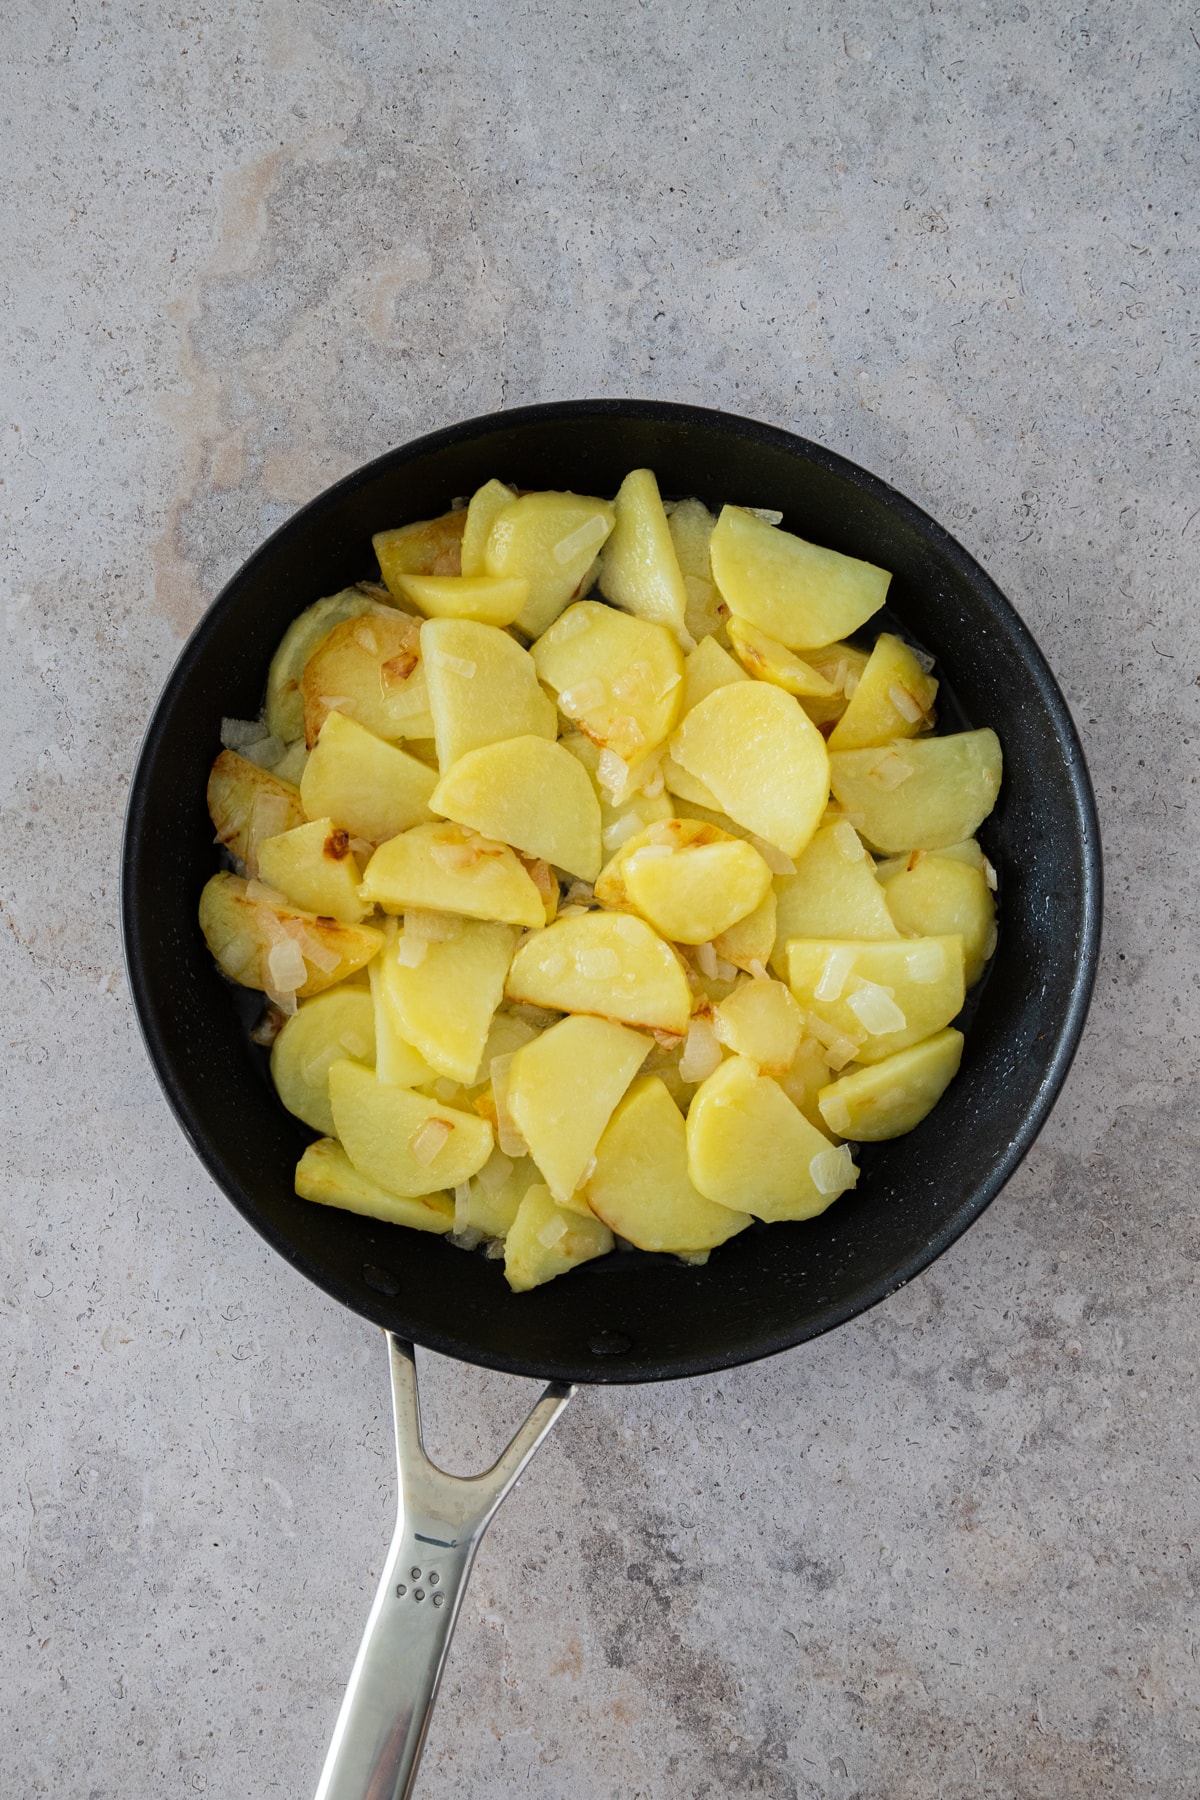 cooked potatoes and onions in the pan